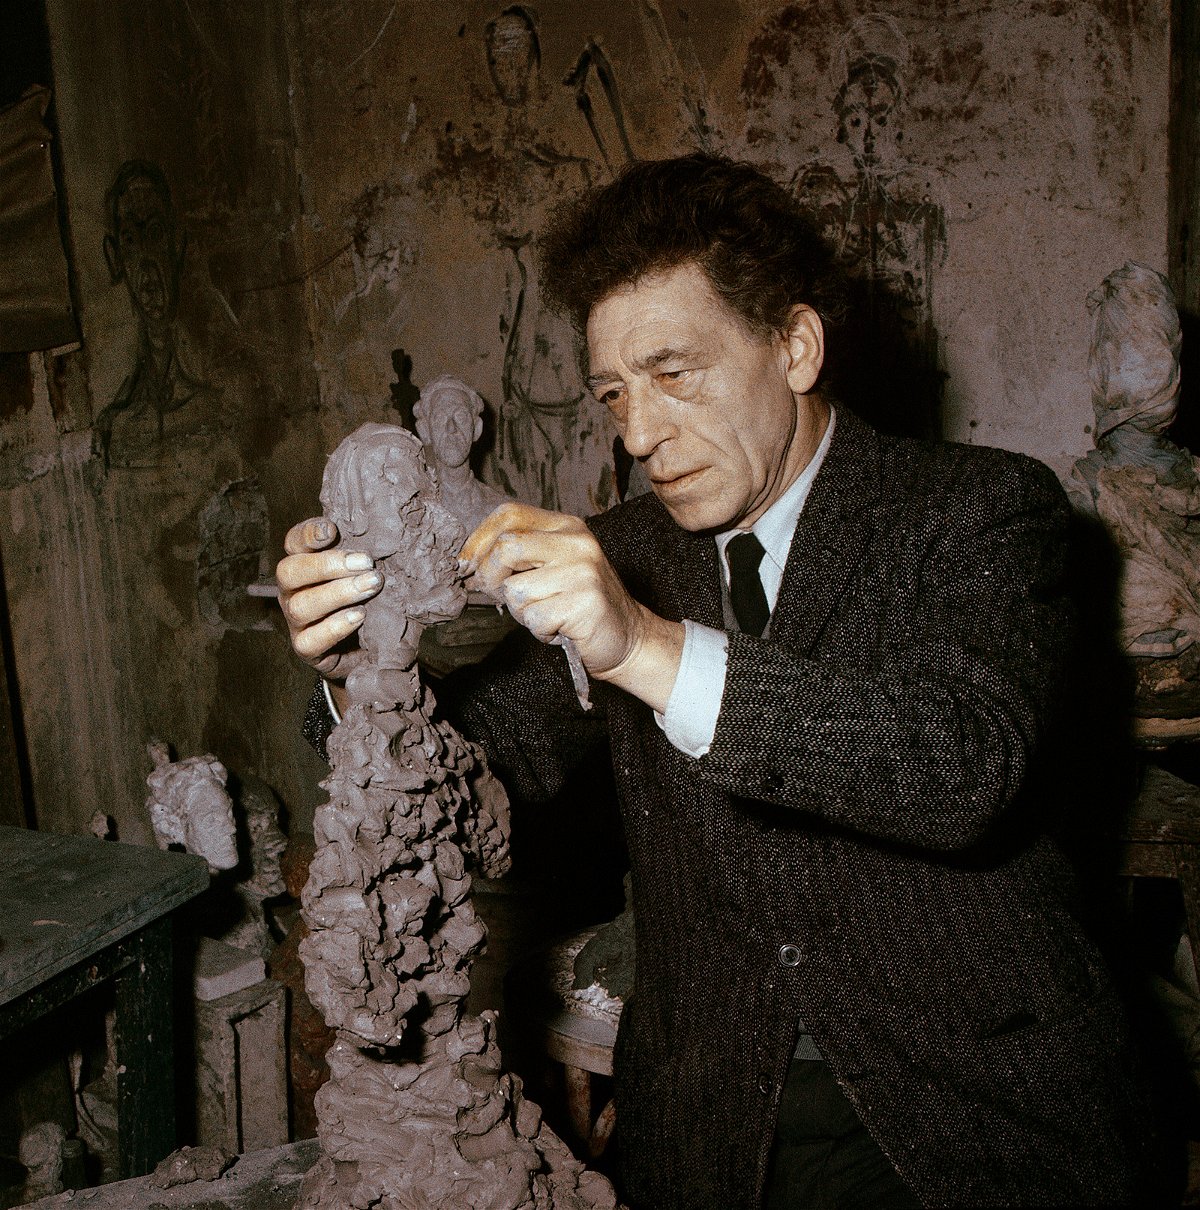 <i>Paul Almasy/Corbis/Getty Images</i><br/>Alberto Giacometti is best known for sculptures of a human figure in plaster or bronze.